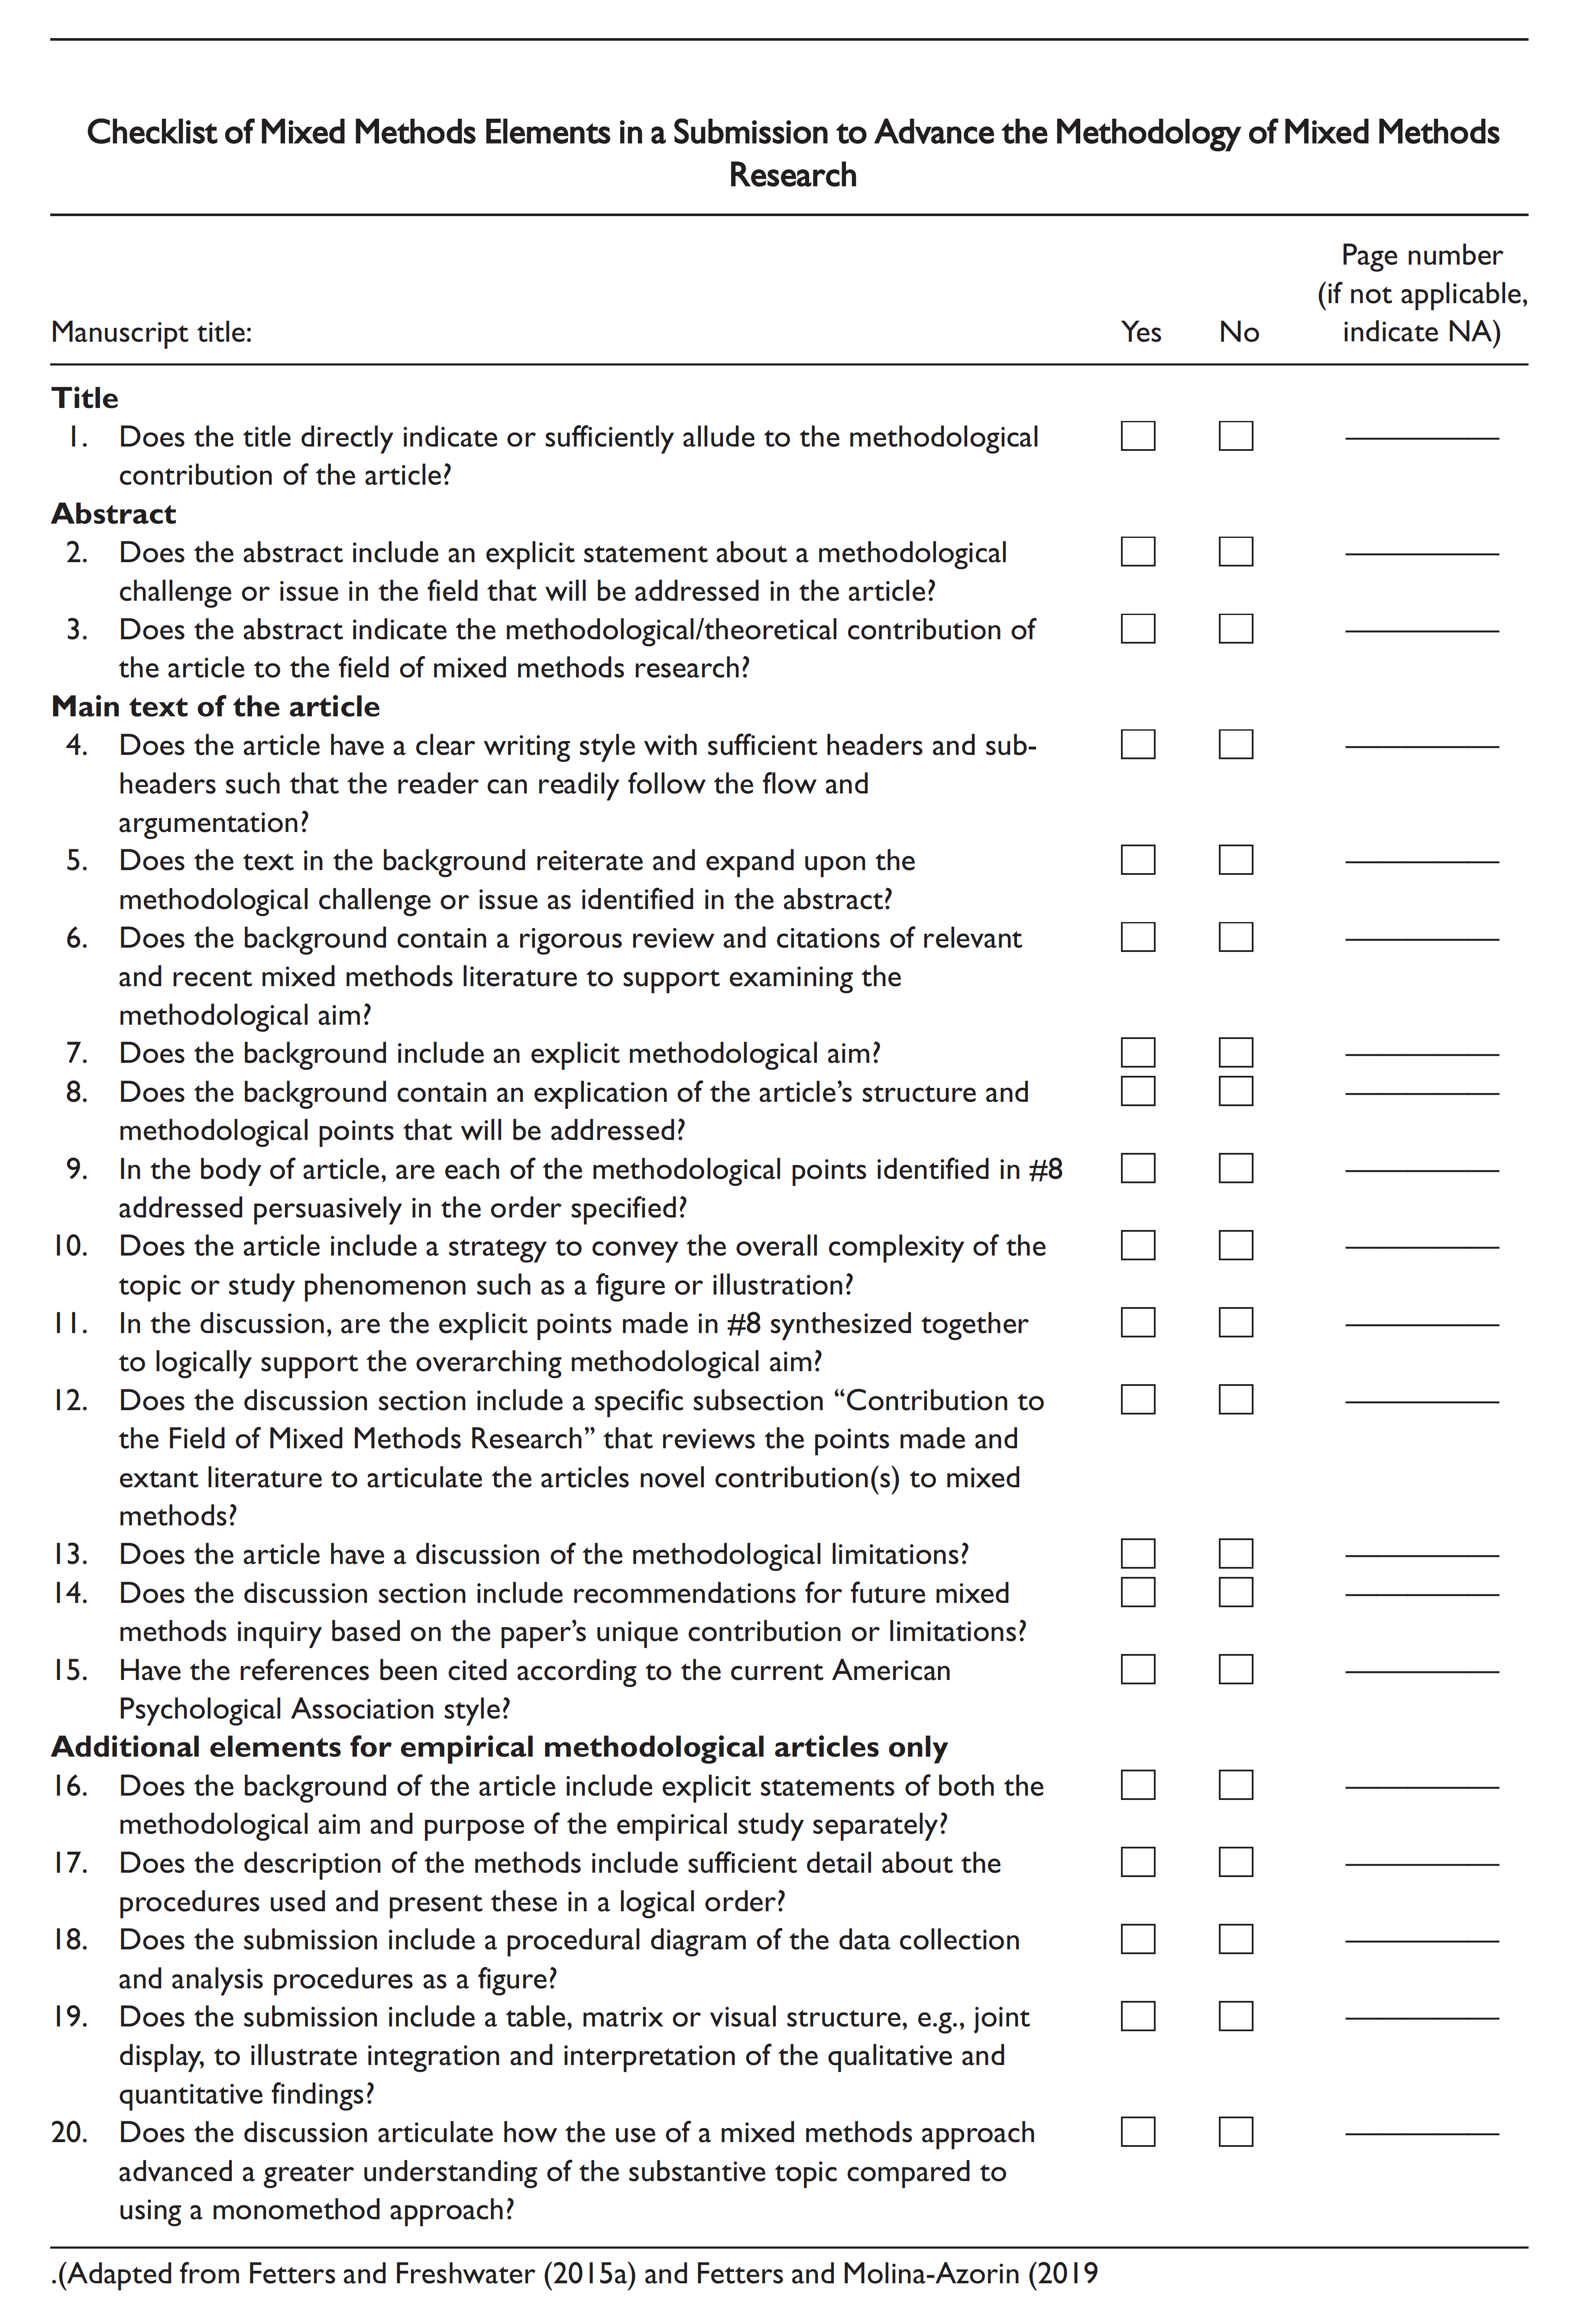 Checklist of Mixed Methods